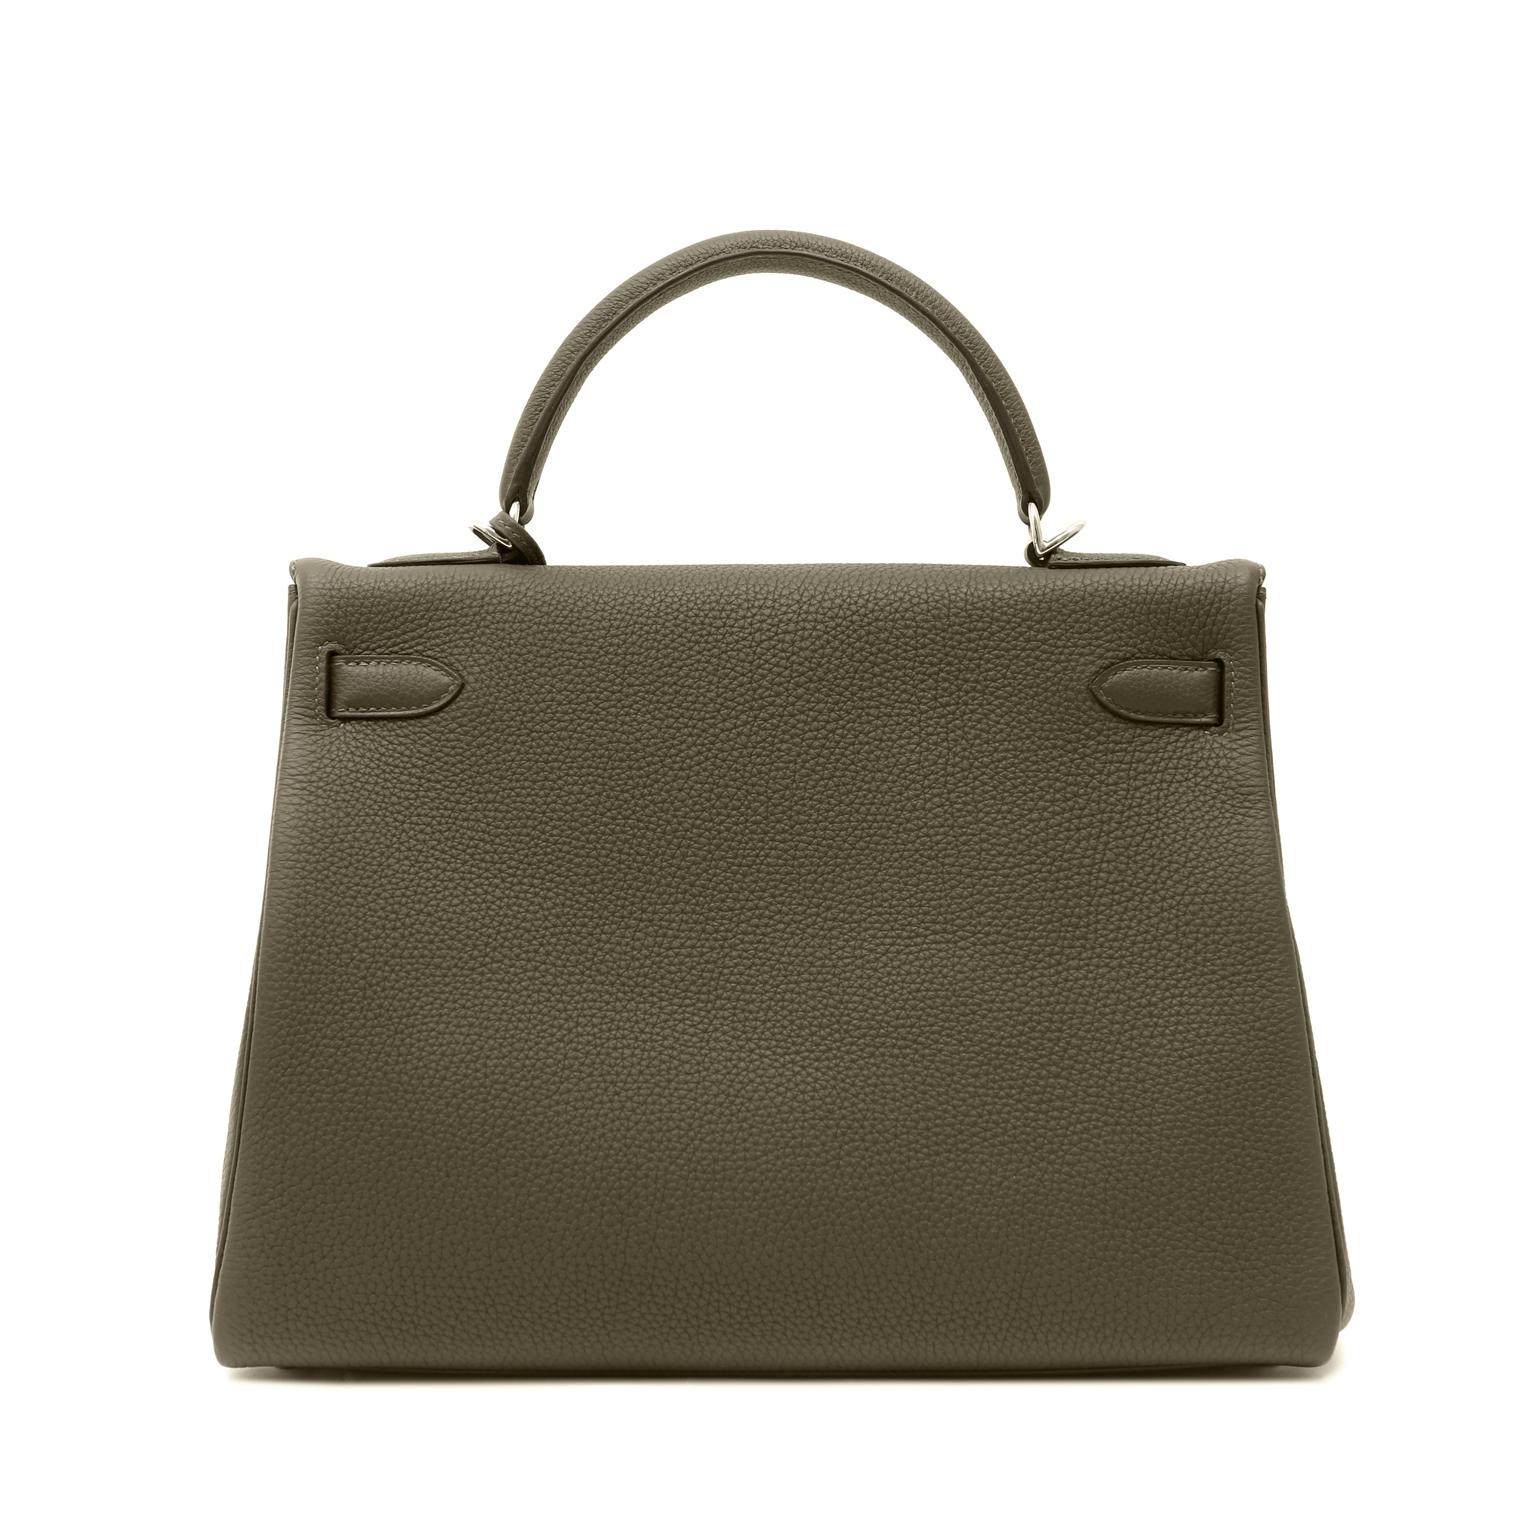 This authentic Hermès Vert Maquis Togo 32 cm Kelly is in pristine unworn condition with the protective plastic intact on the hardware.  A new green from Hermès, this dark grey green is a fabulous neutral.  

Textured and soft to the hand, Togo